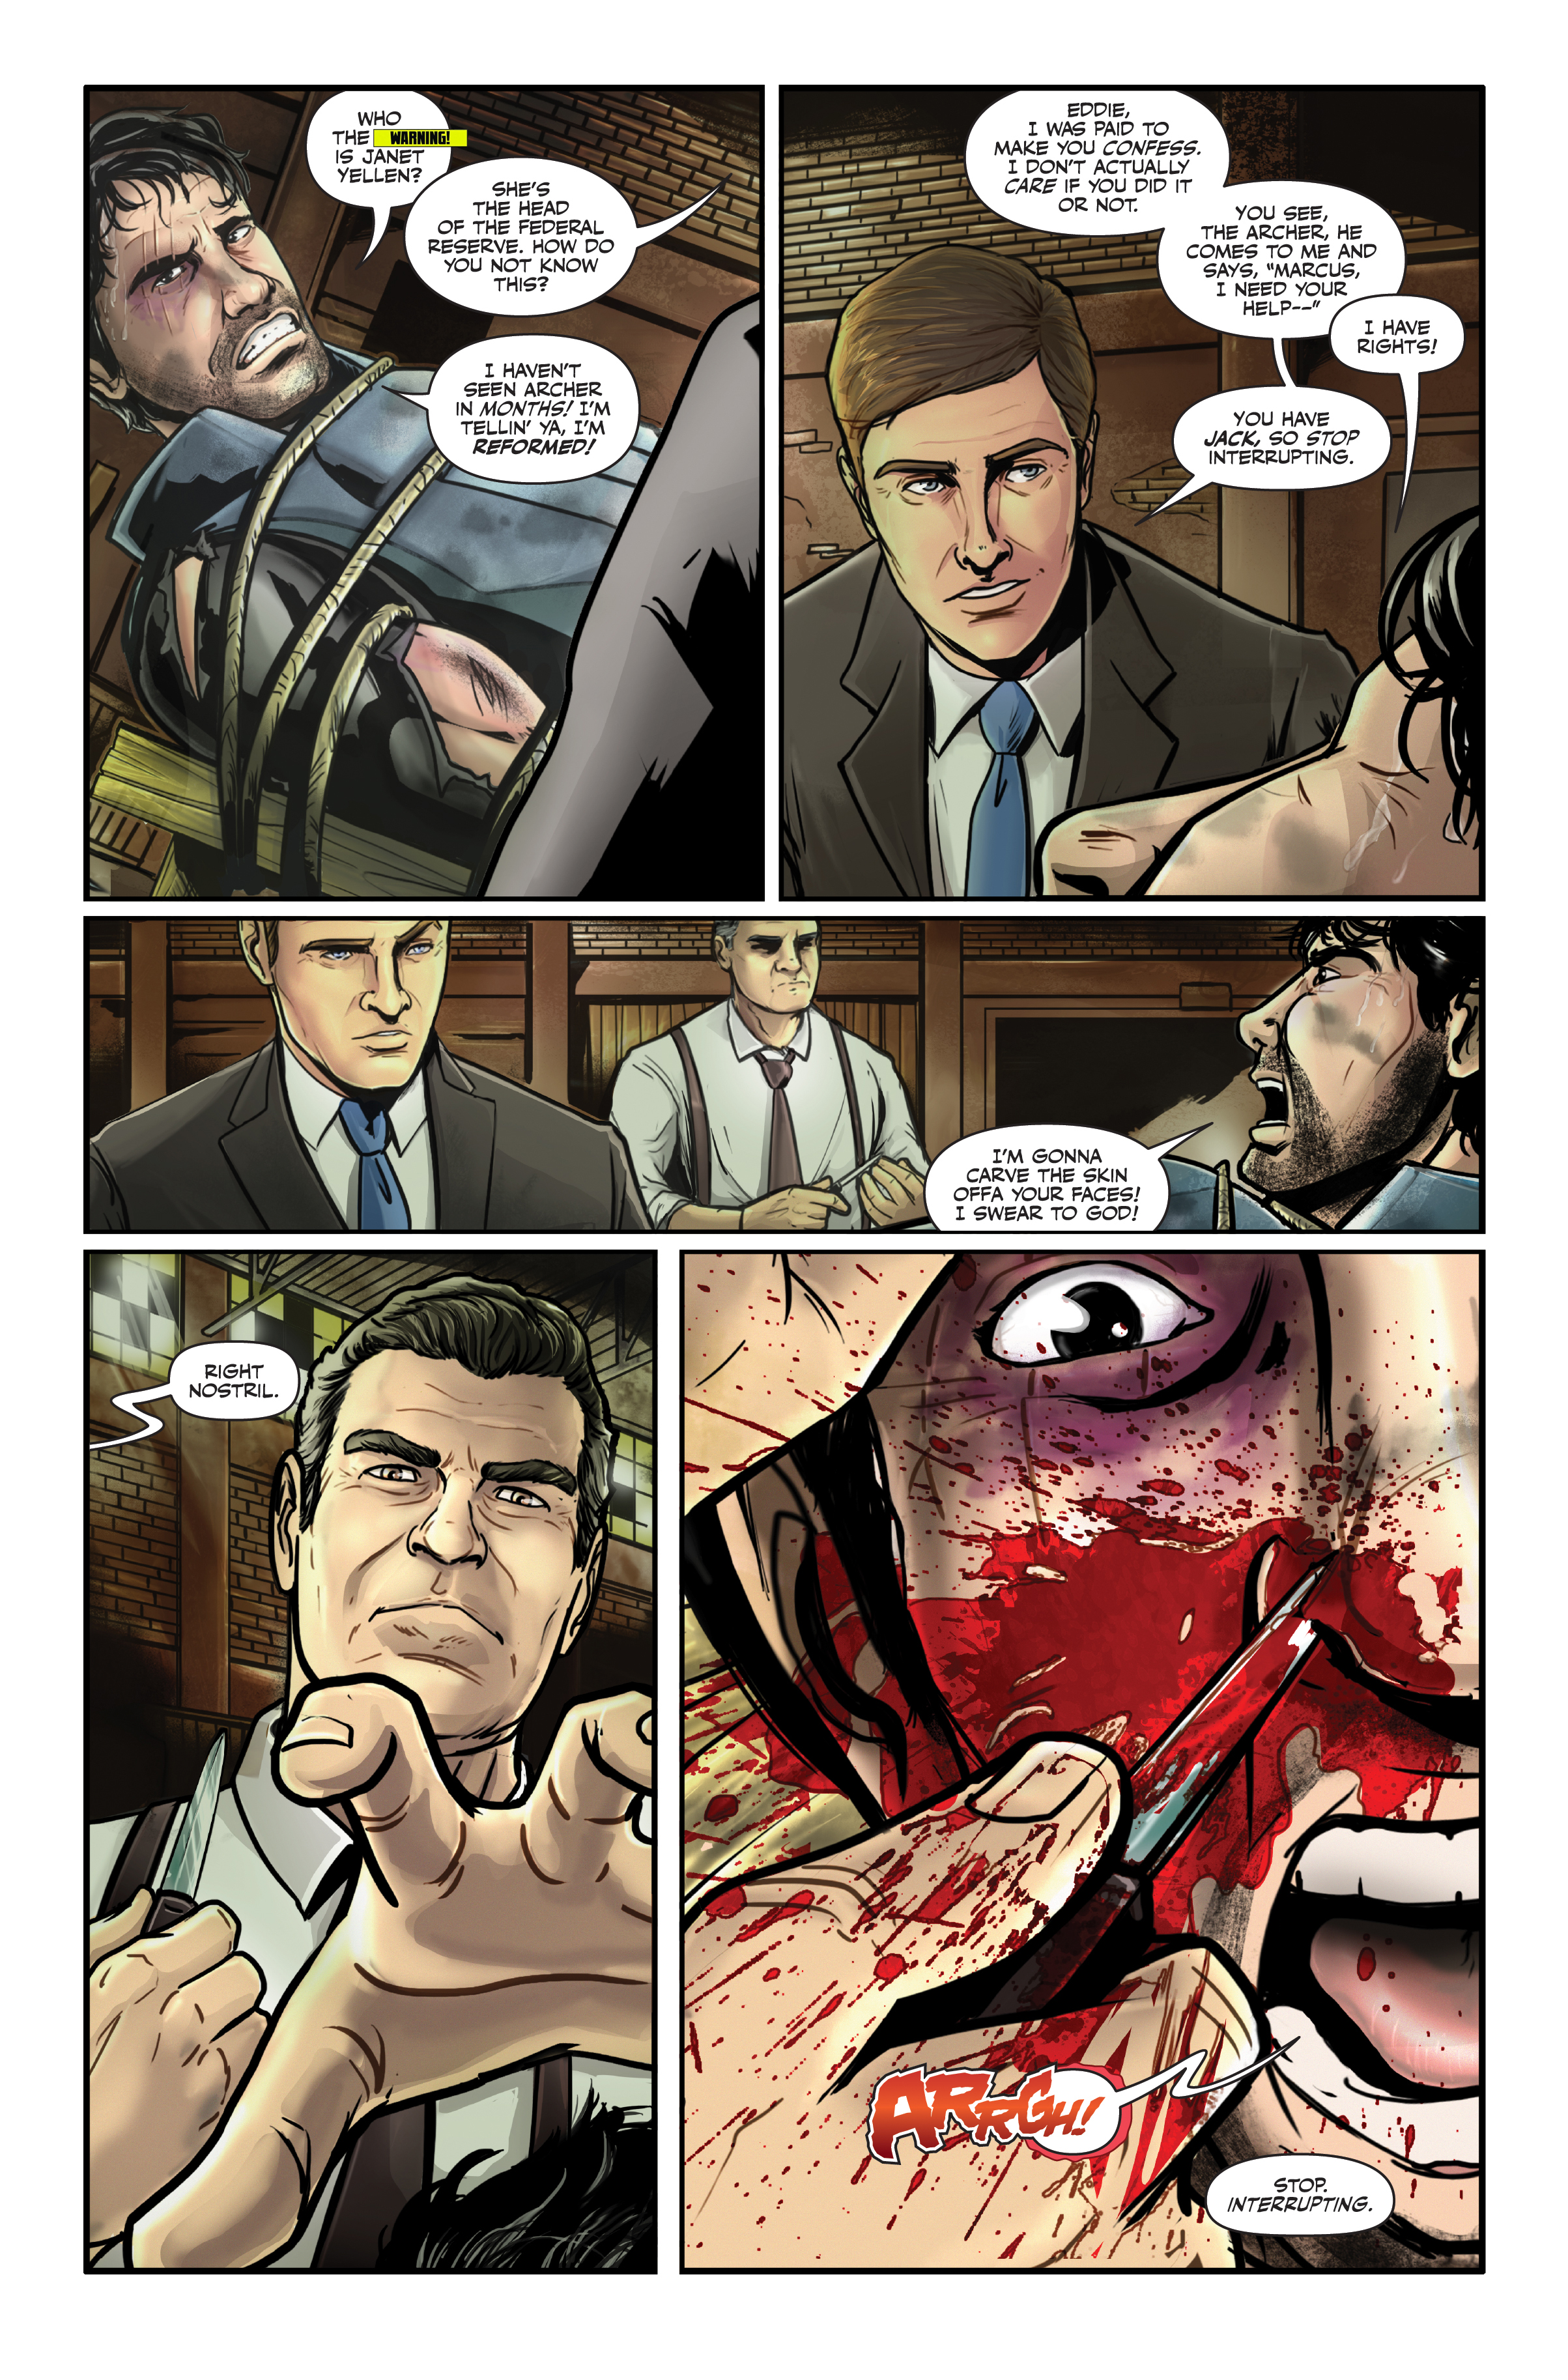 The Consultant #1 Page 2.jpg